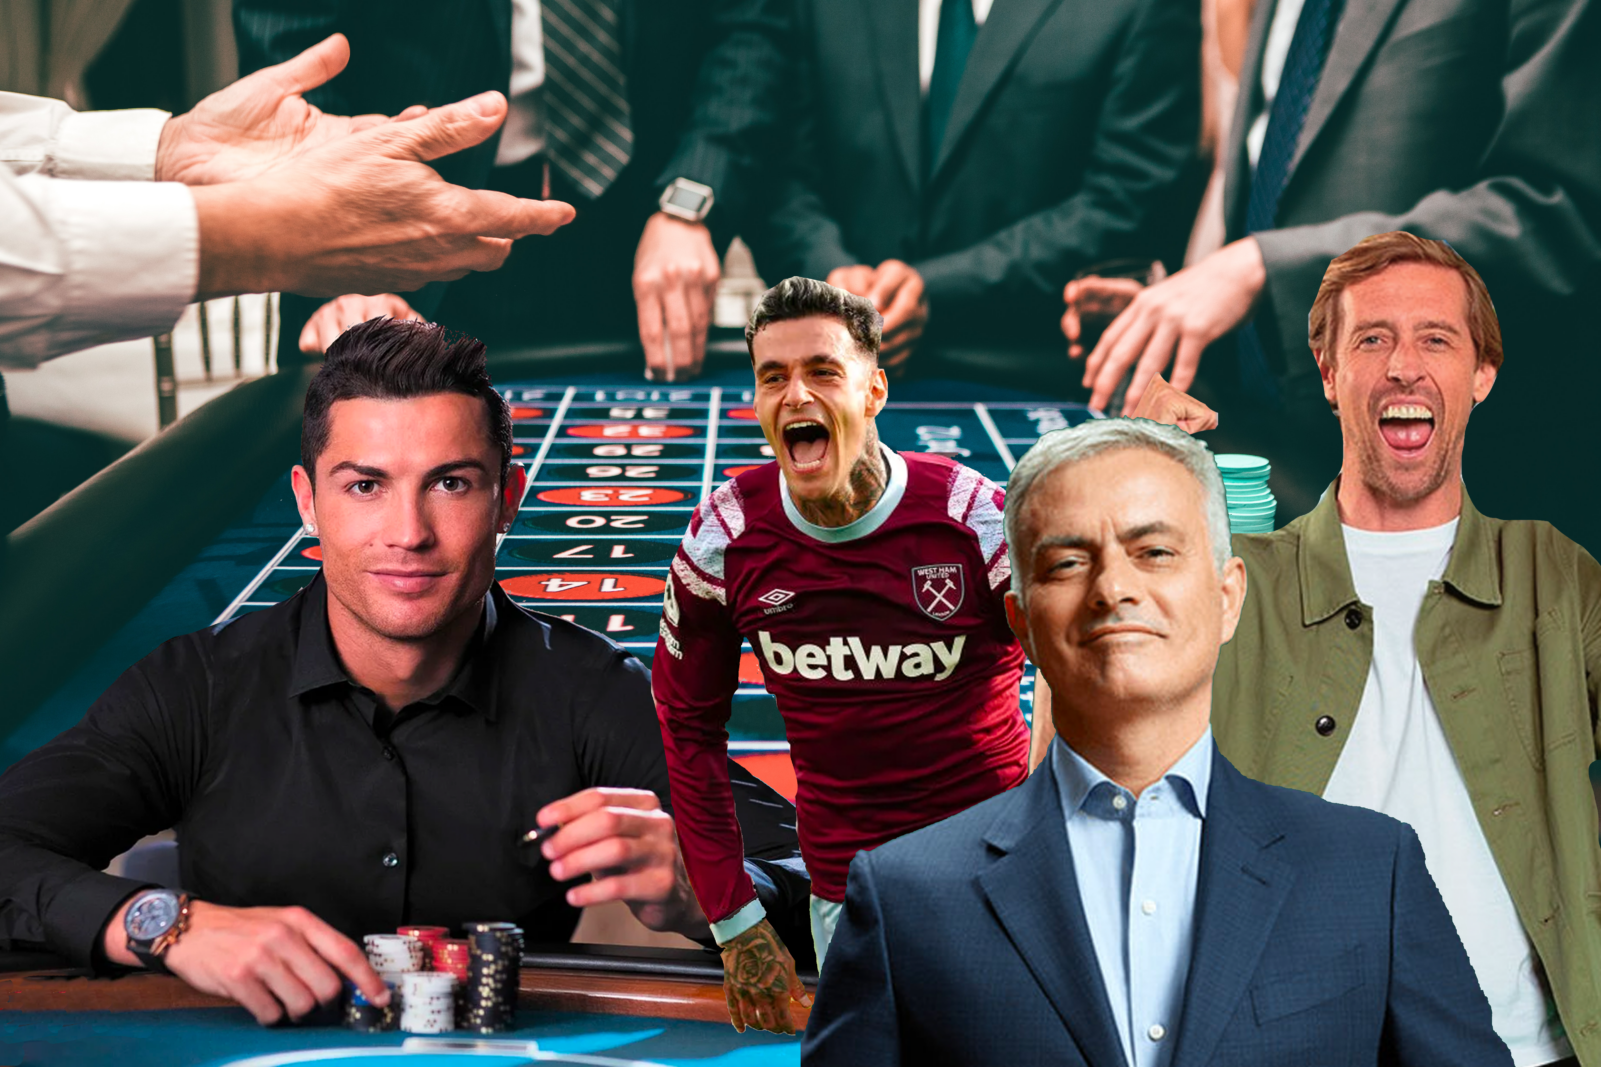 Celebrities are now banned from promoting gambling brands